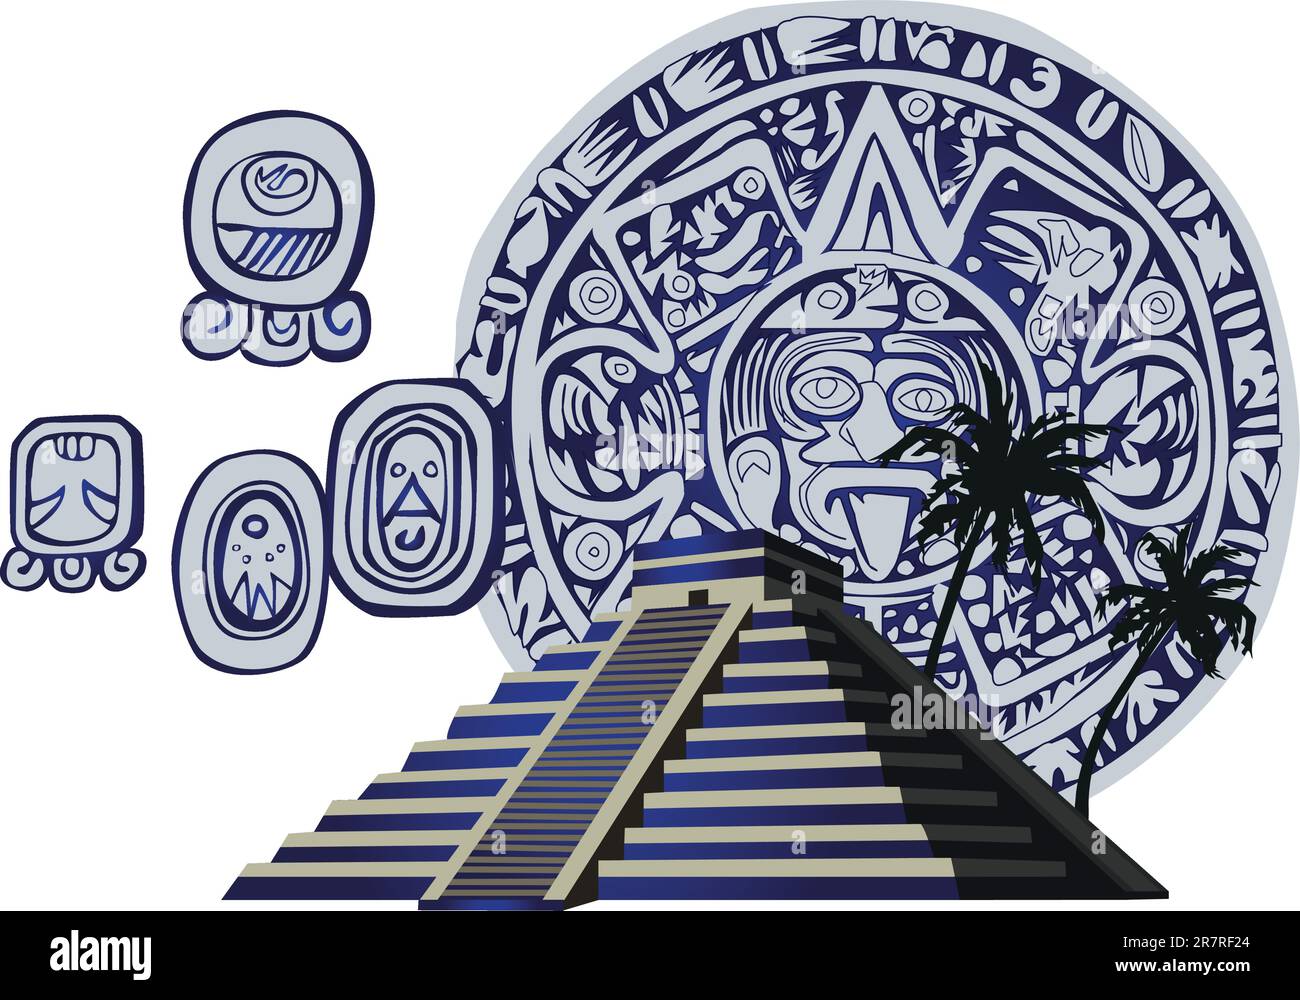 Illustration with Mayan Pyramid and ancient glyphs Stock Vector